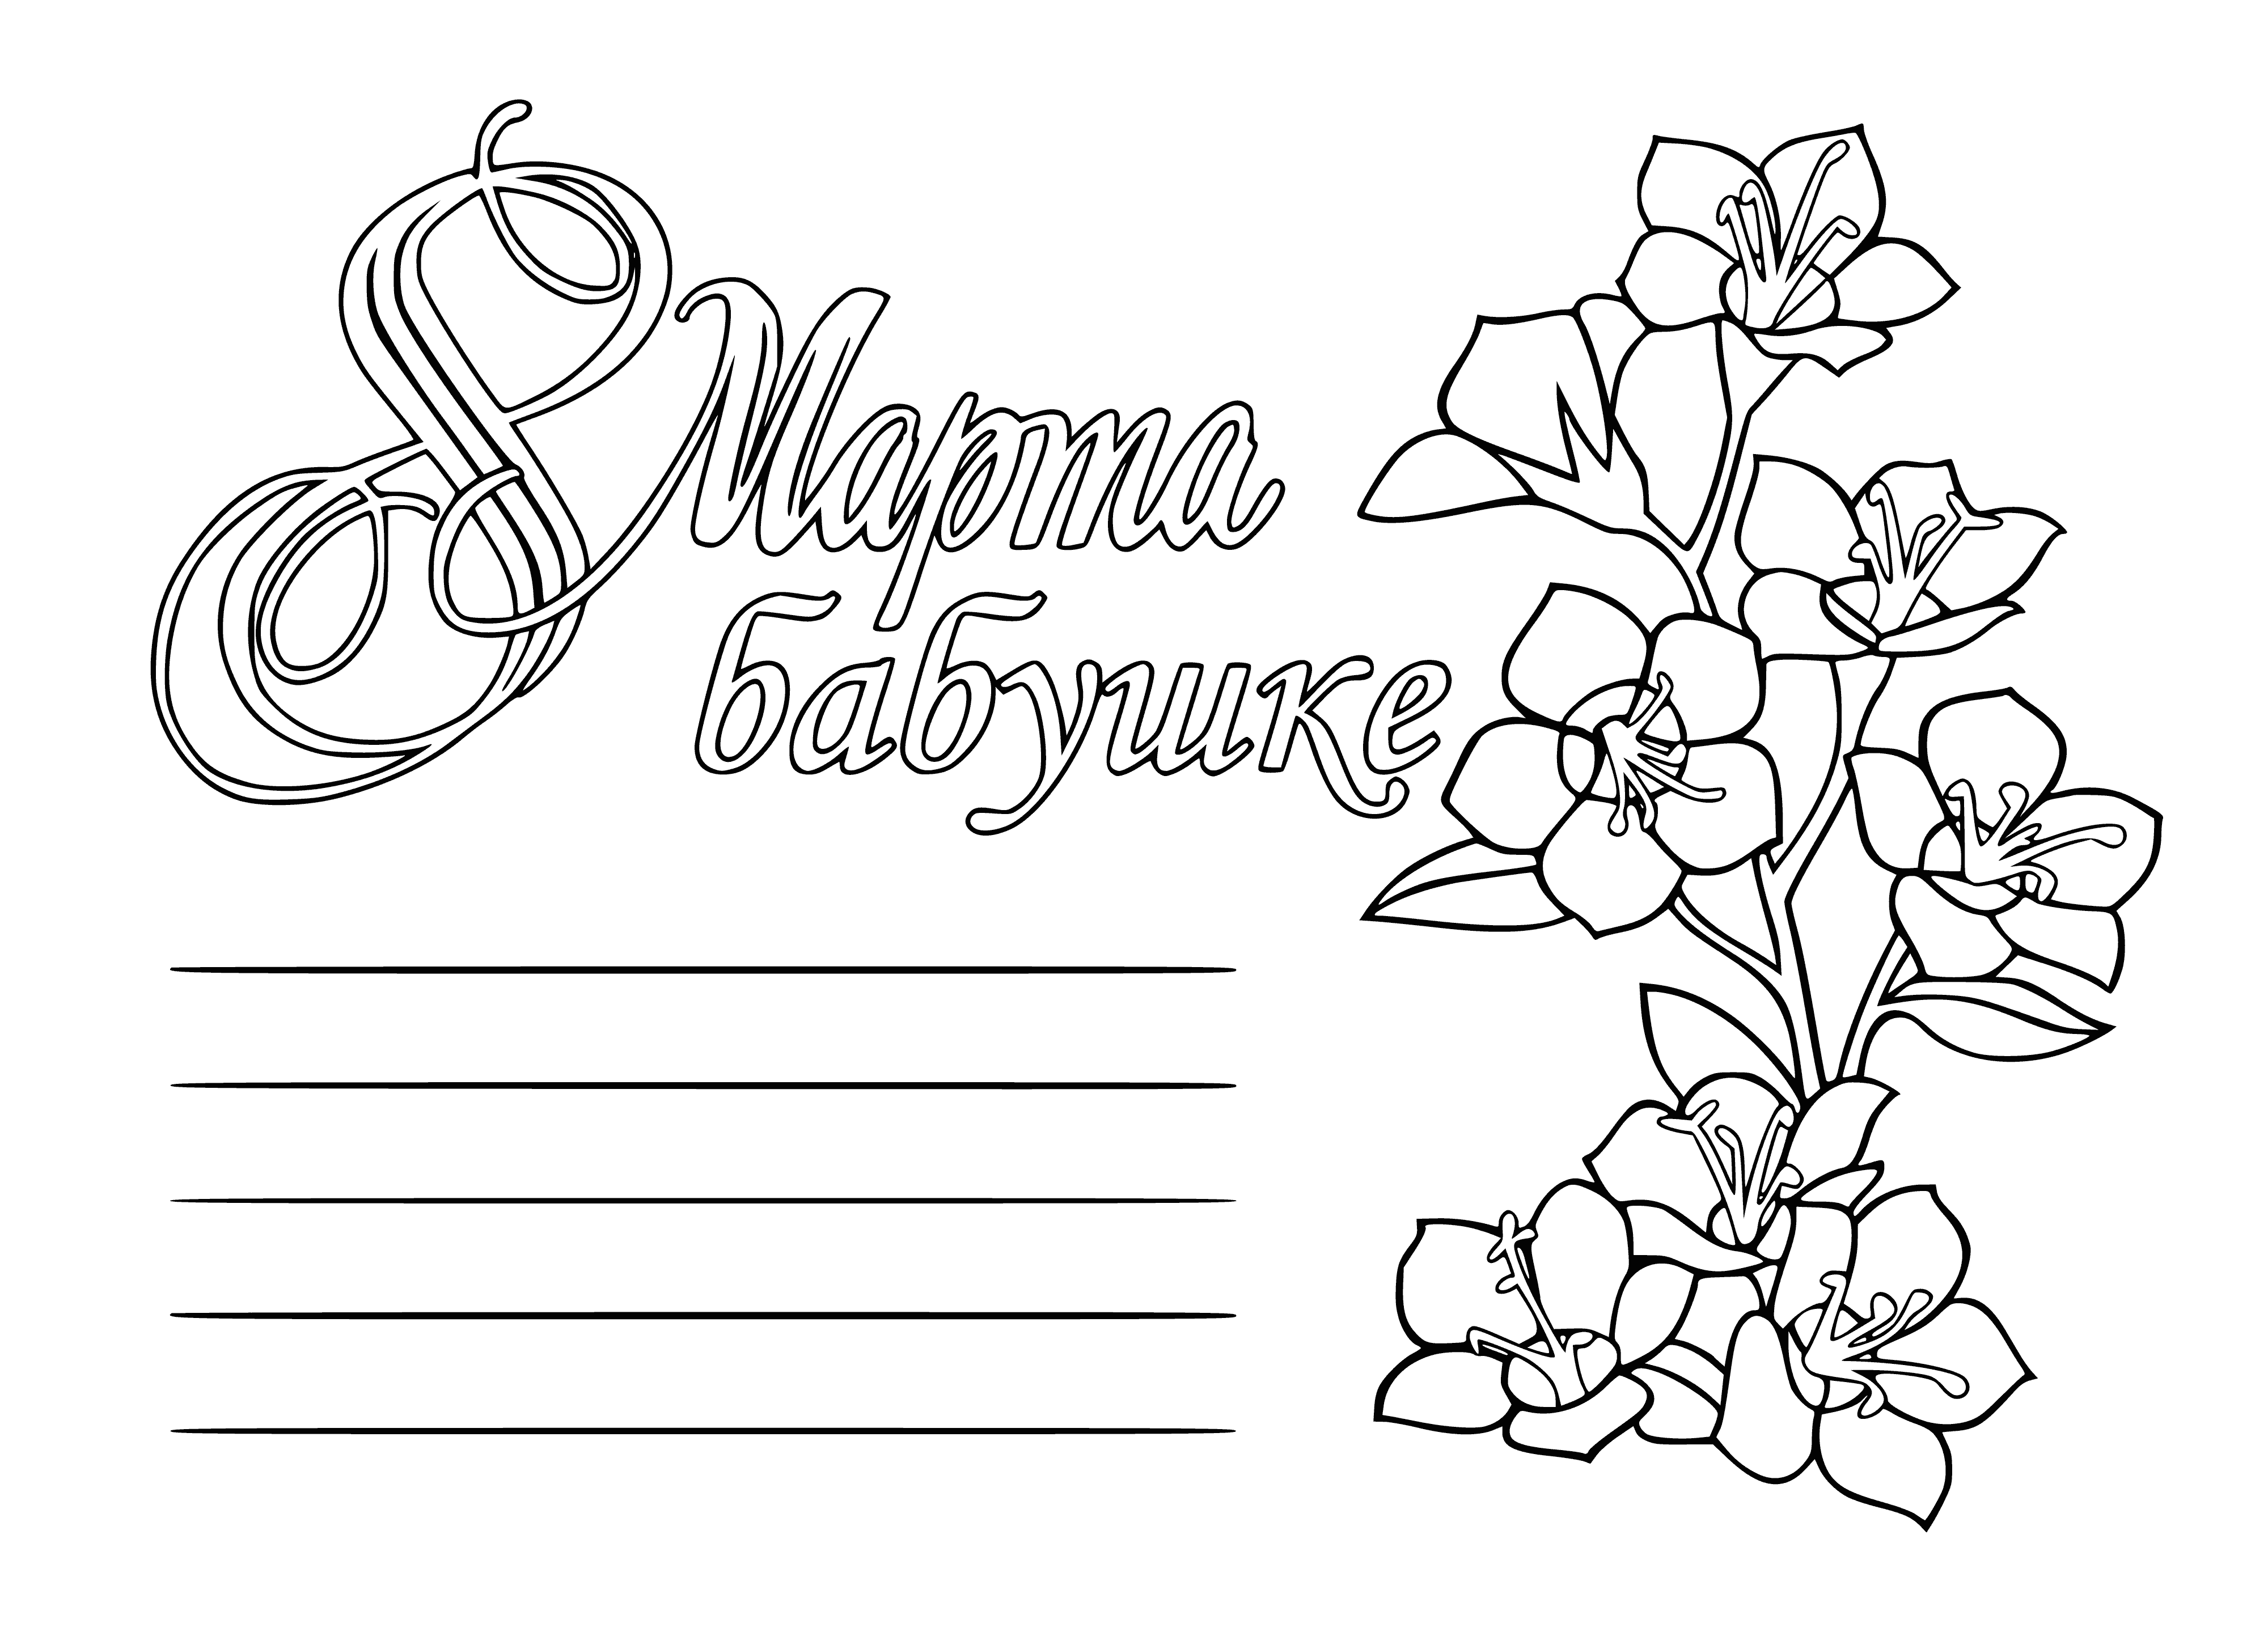 Grandma by March 8 coloring page